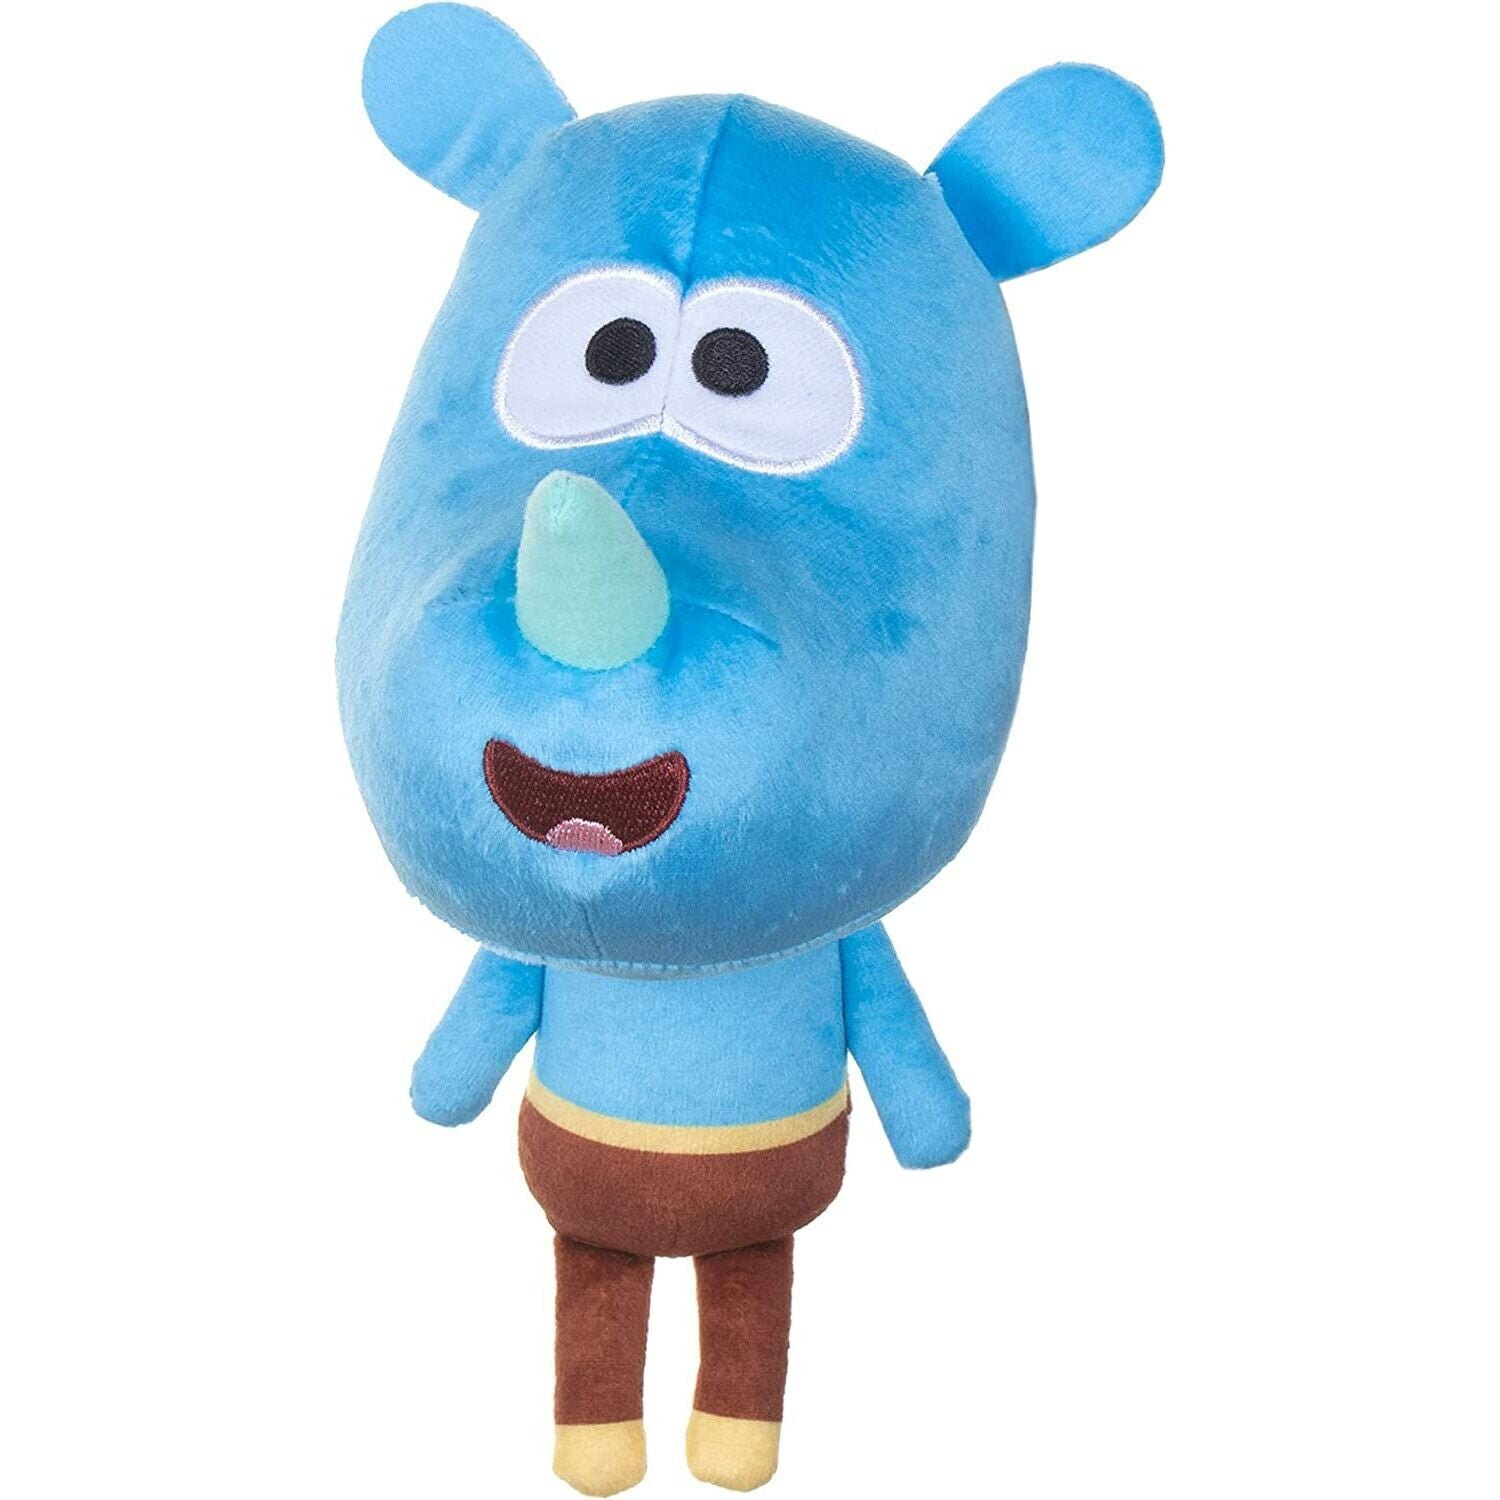 "New Hey Duggee 7" Squirrel Softie Plush Toy - Tagged - Fast Shipping"